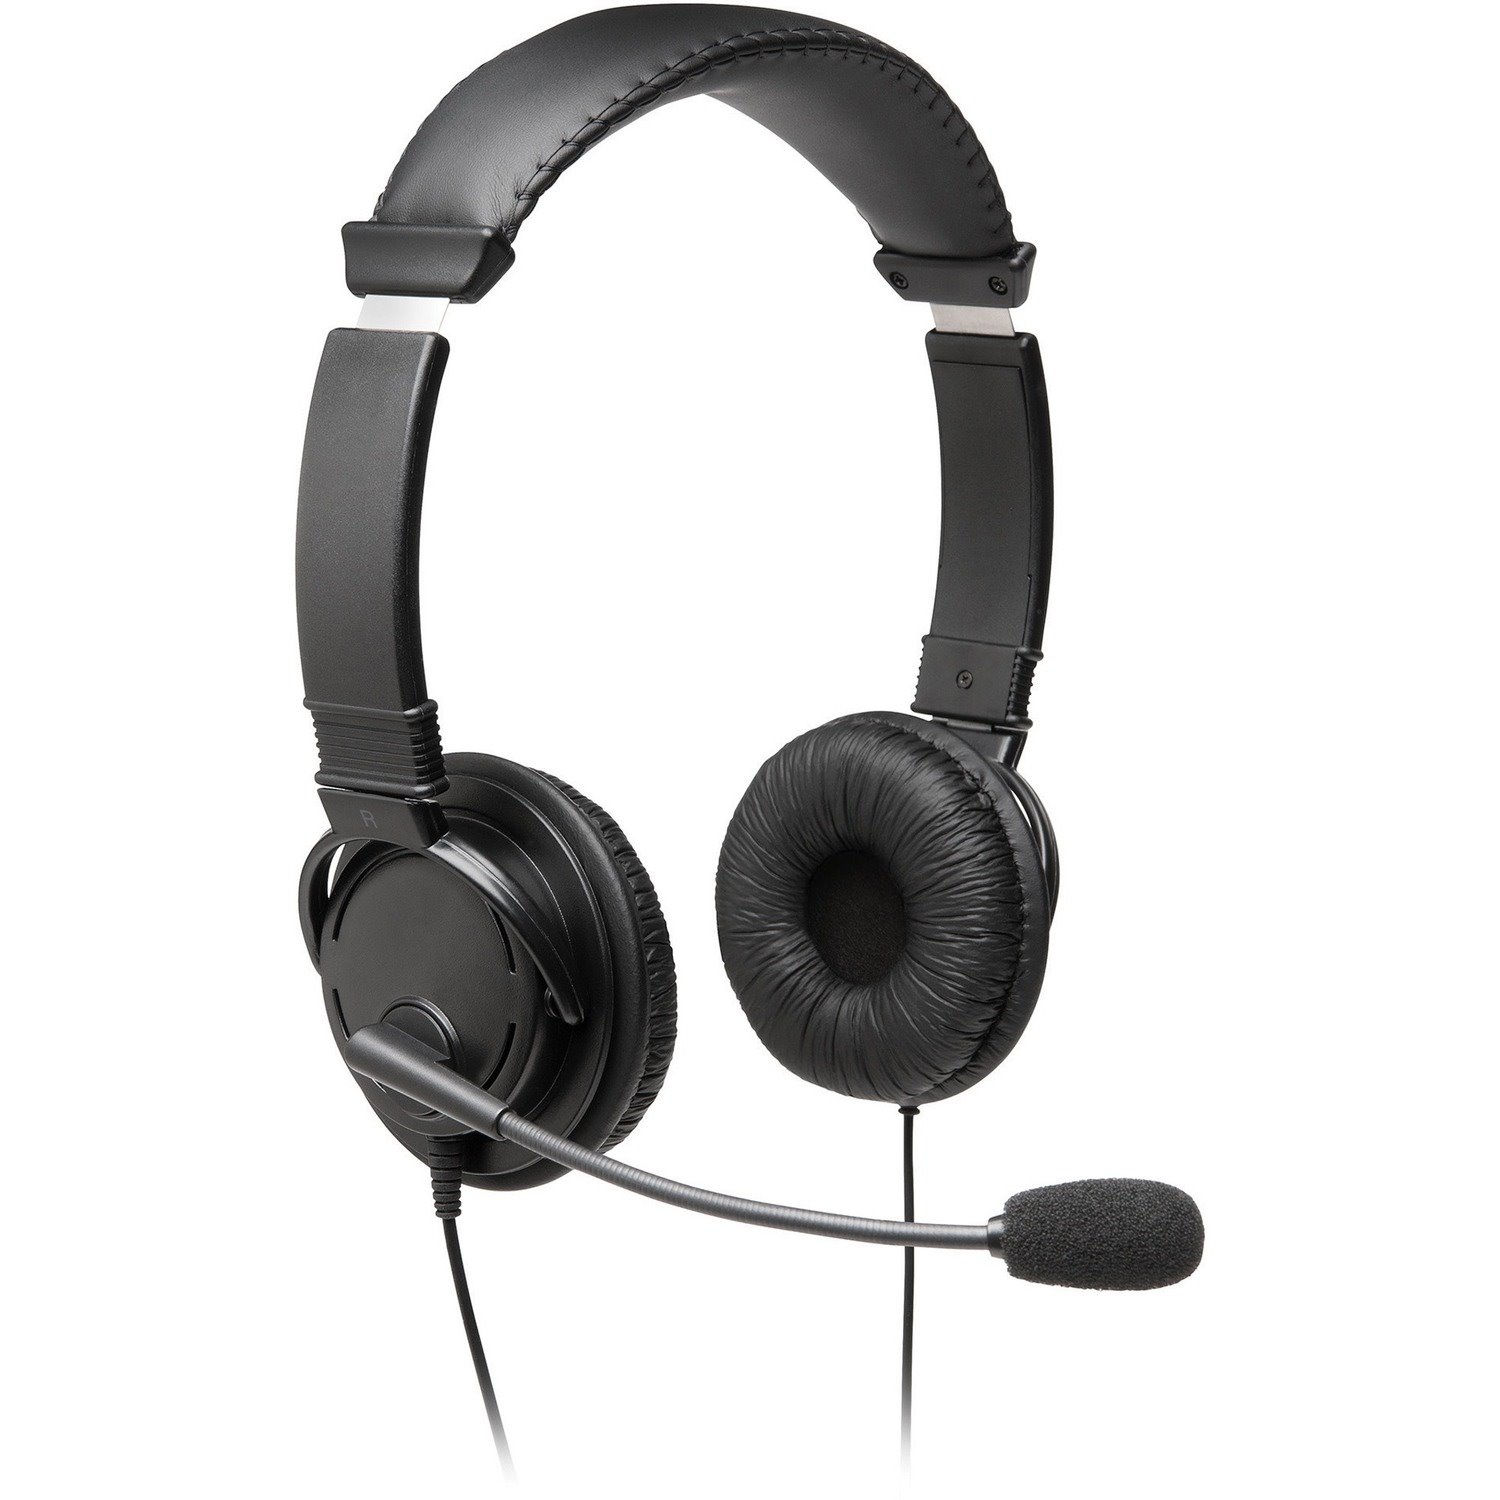 Kensington Wired Over-the-head Stereo Headset - Black